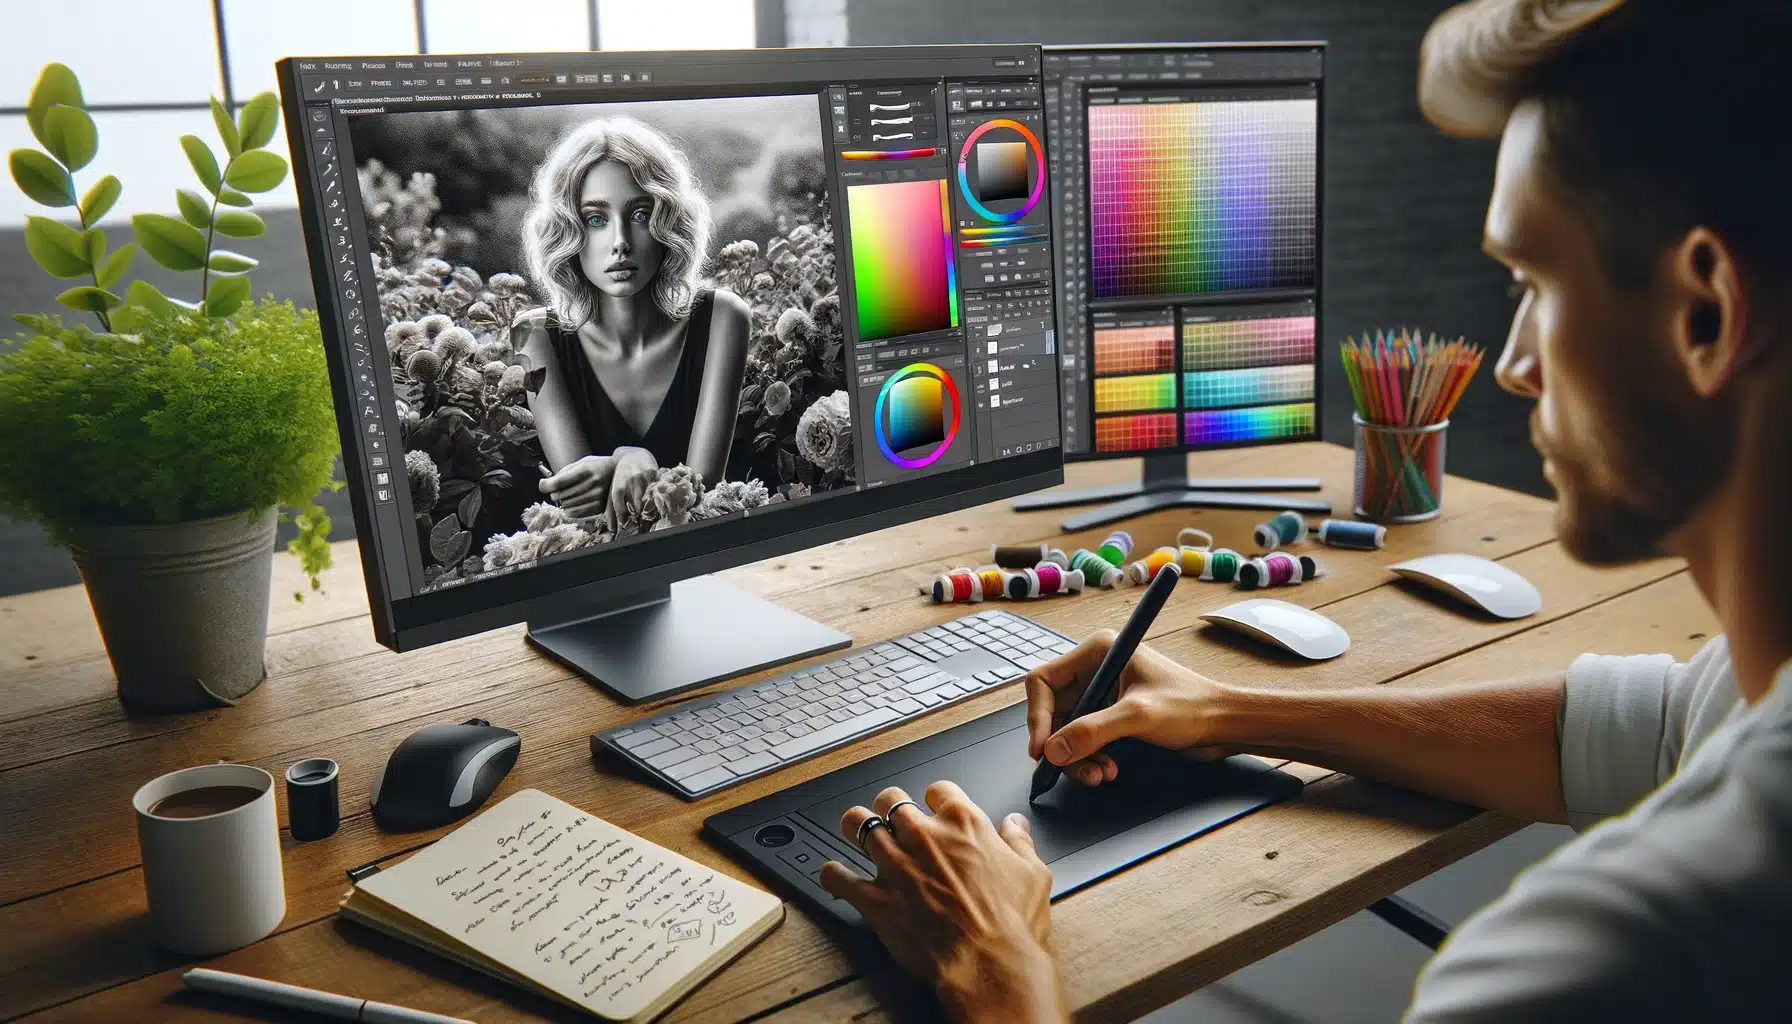 A graphic designer's workspace featuring a computer screen with Photoshop open, showing the process of colorizing a black and white photo. The designer is using a graphics tablet and stylus.